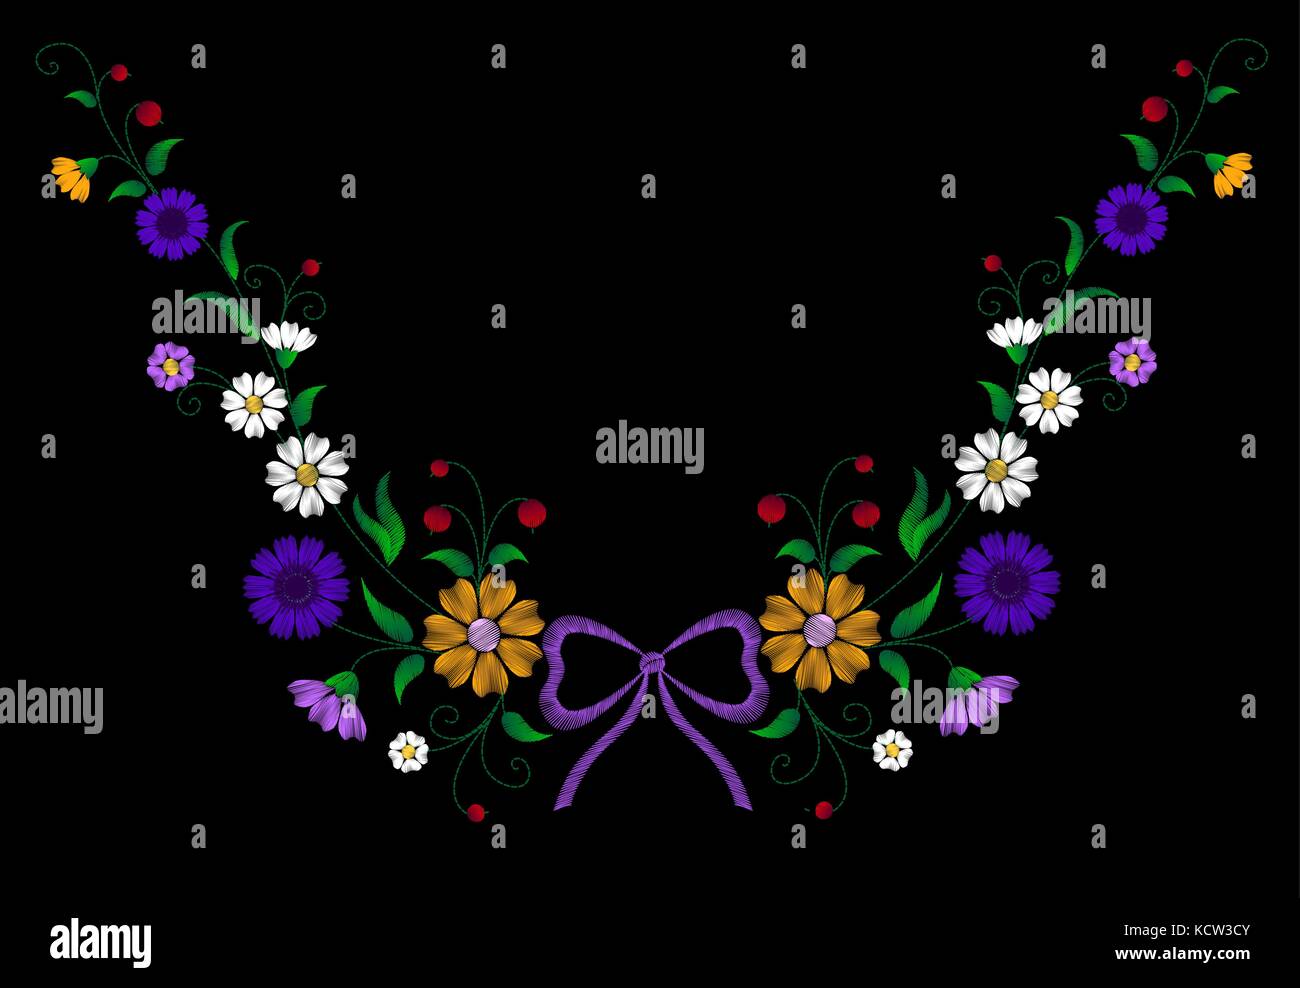 Embroidery flower necklace traditional ornament decoration field rustic cornflowers daisy marigold strawberries butterfly design vector illustration v Stock Vector